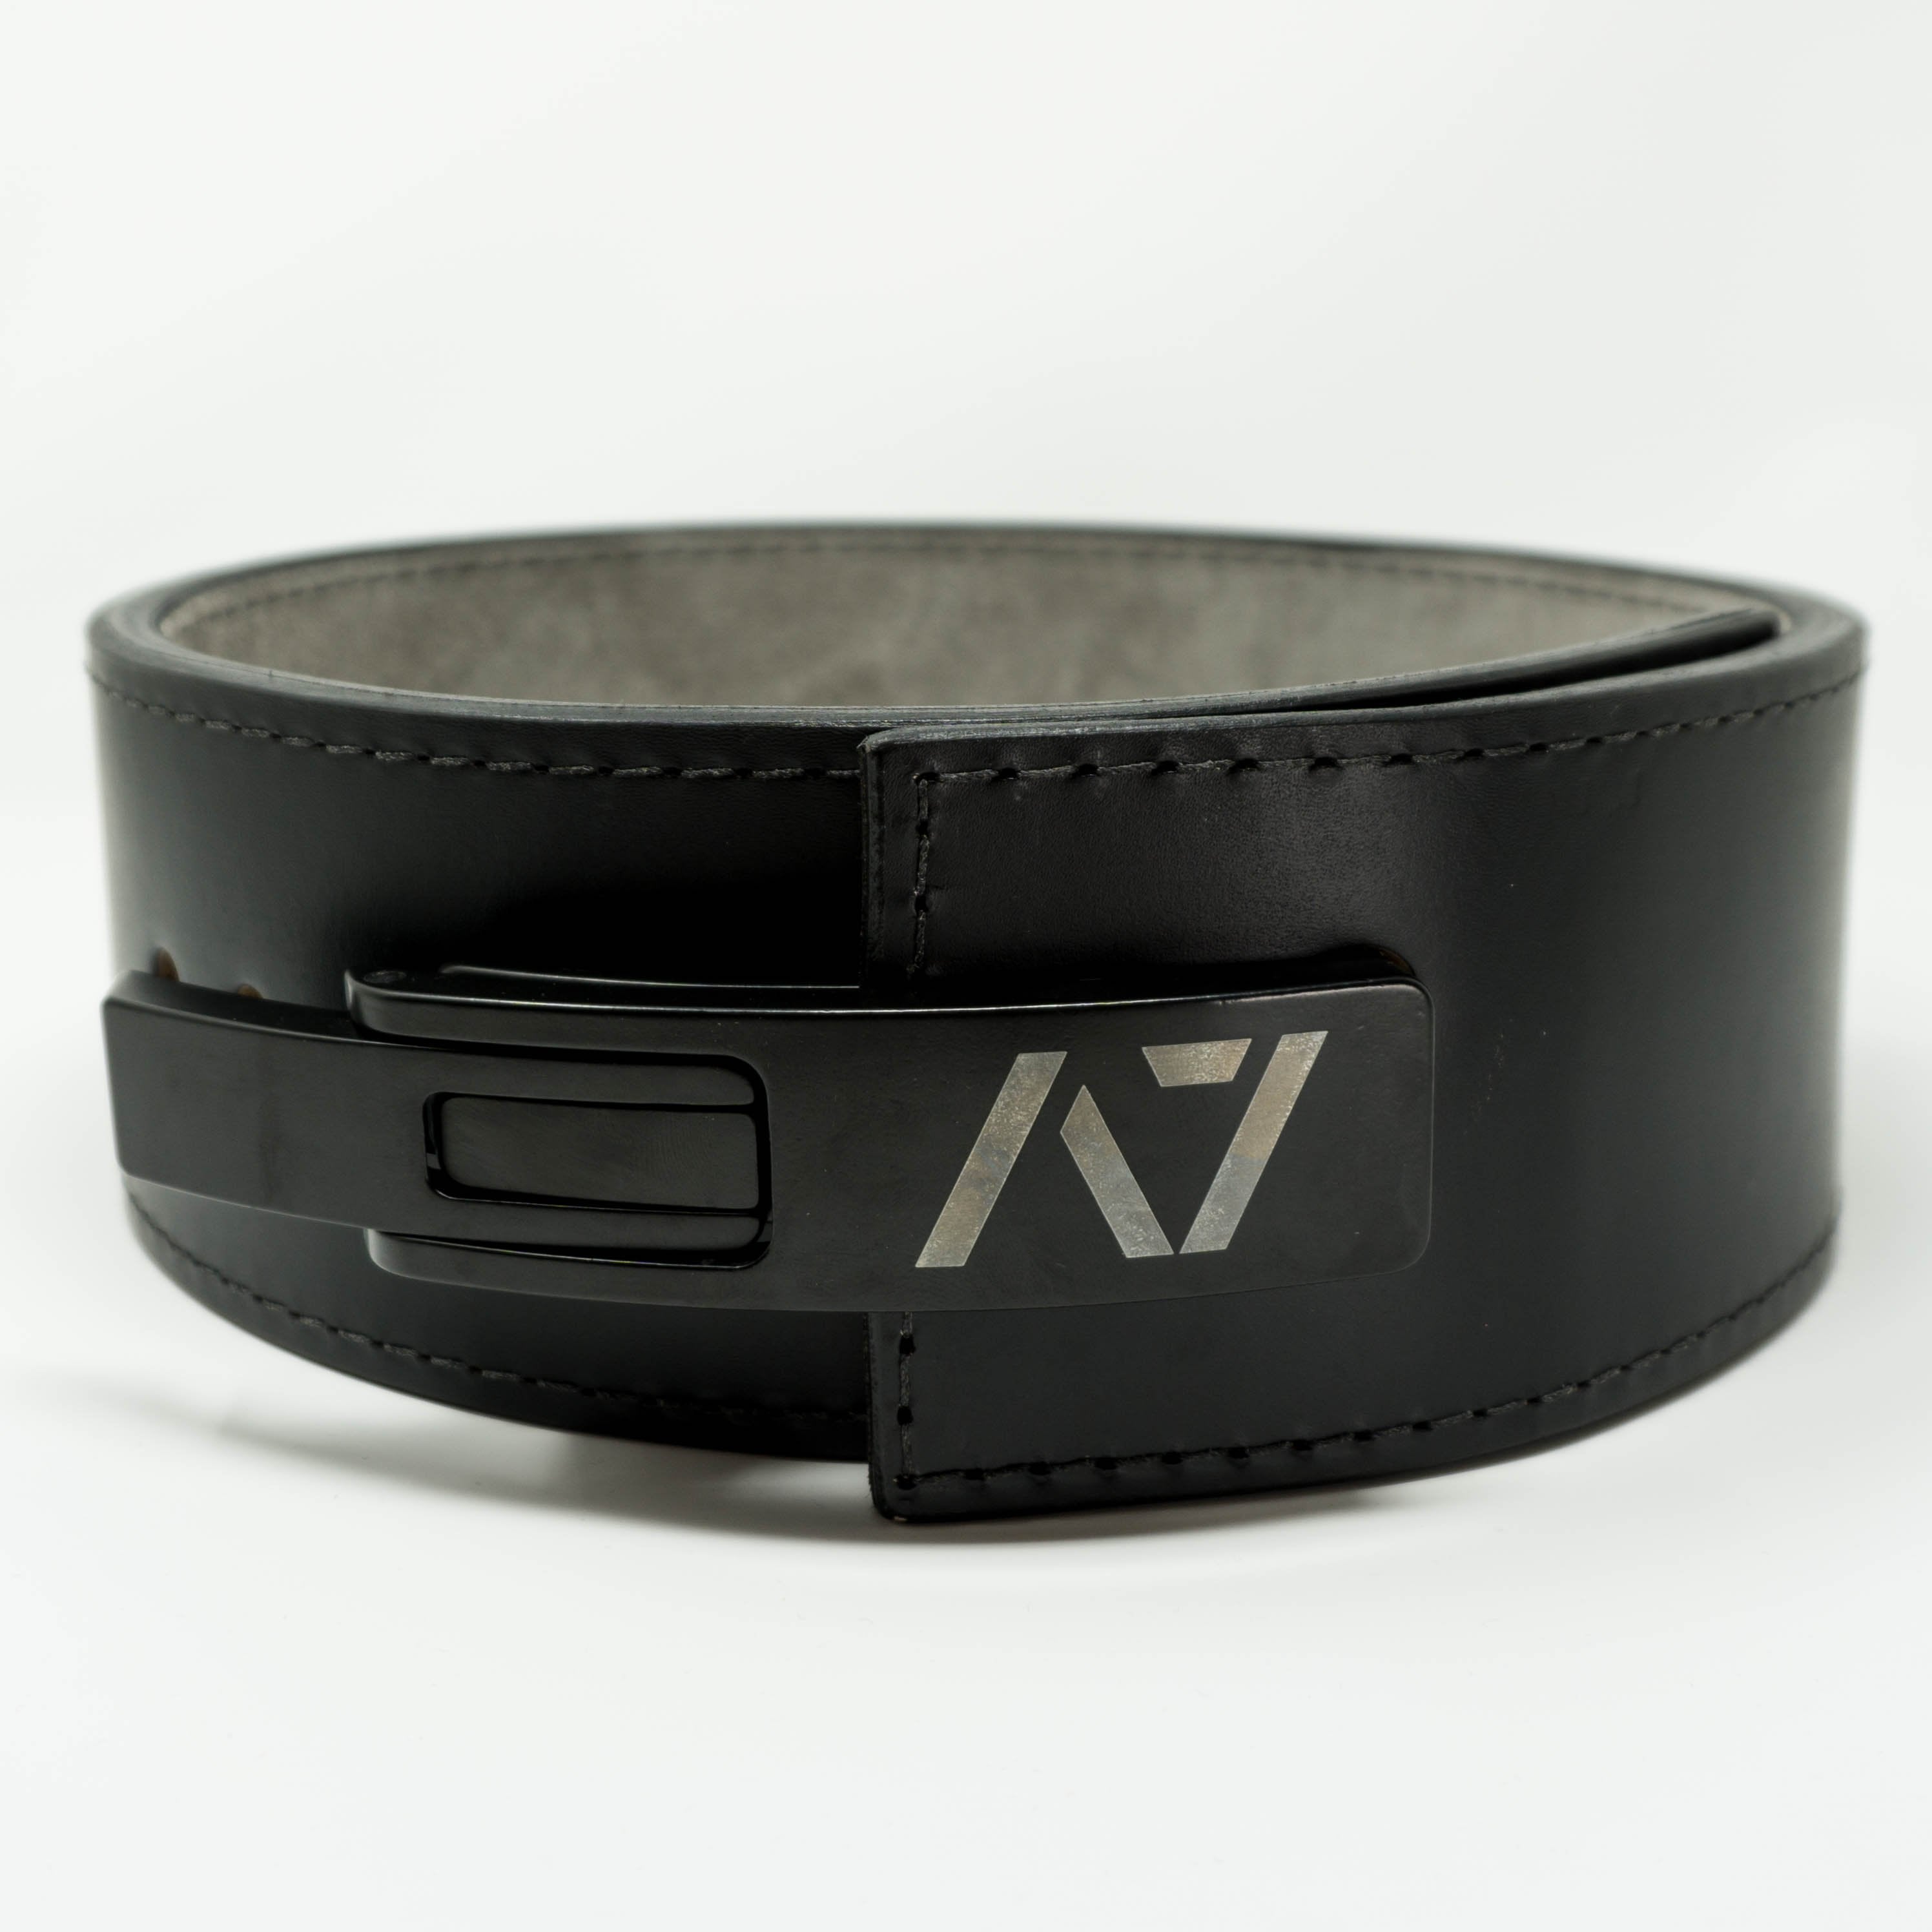 The A7 Lever belt is great for powerlifting and strongman. Purchase this powerlifting belts from A7 UK. Purchase Powerlifting Belts from A7 UK. Best Weightlifting belts shipping to UK and Europe from A7 UK. Pioneer lever weightlifting belt. The best Powerlifting apparel for all your workouts. This A7 Pioneer Cut Prong belt is the perfect piece of equipment to finish off your IPF Approved Kit. 